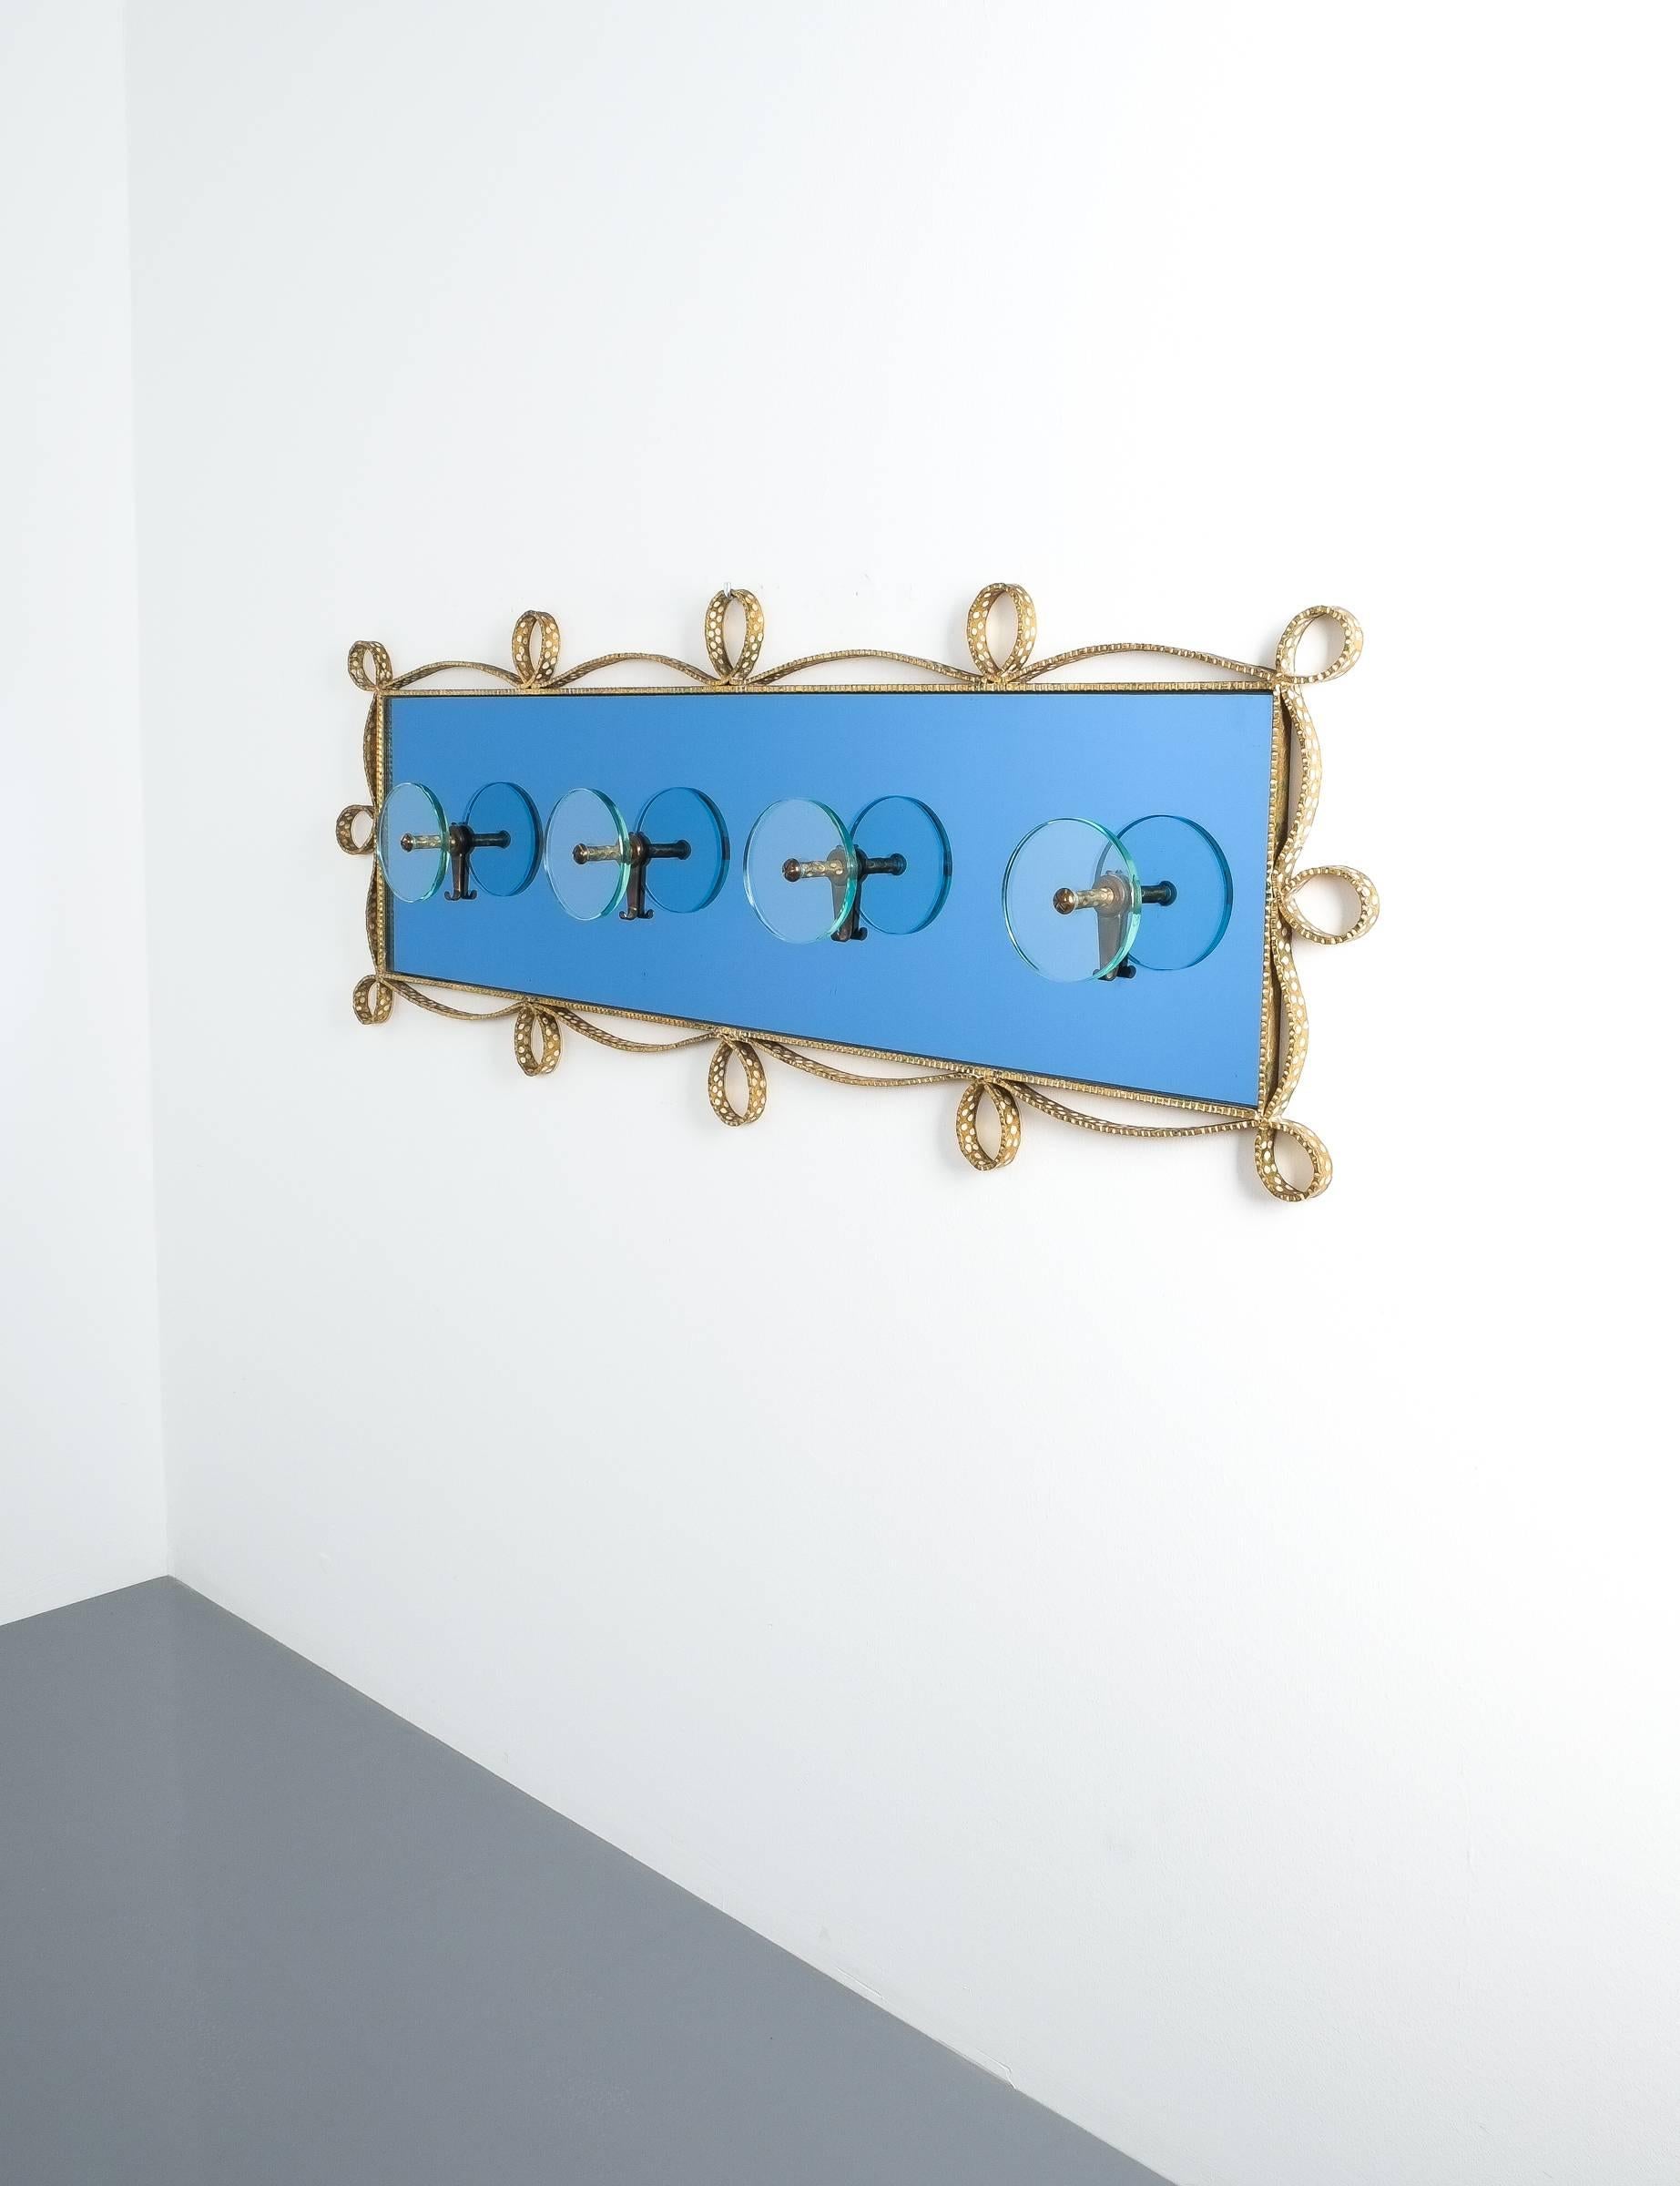 Pier Luigi Colli coatrack wall wardrobe iron blue glass mirror, Italy, 1955 (for crystal Art Torino) Beautiful coatrack made from smooth glass pieces in rare mirrored blue and clear glass. Typical Colli ornamental iron frame-work. Excellent